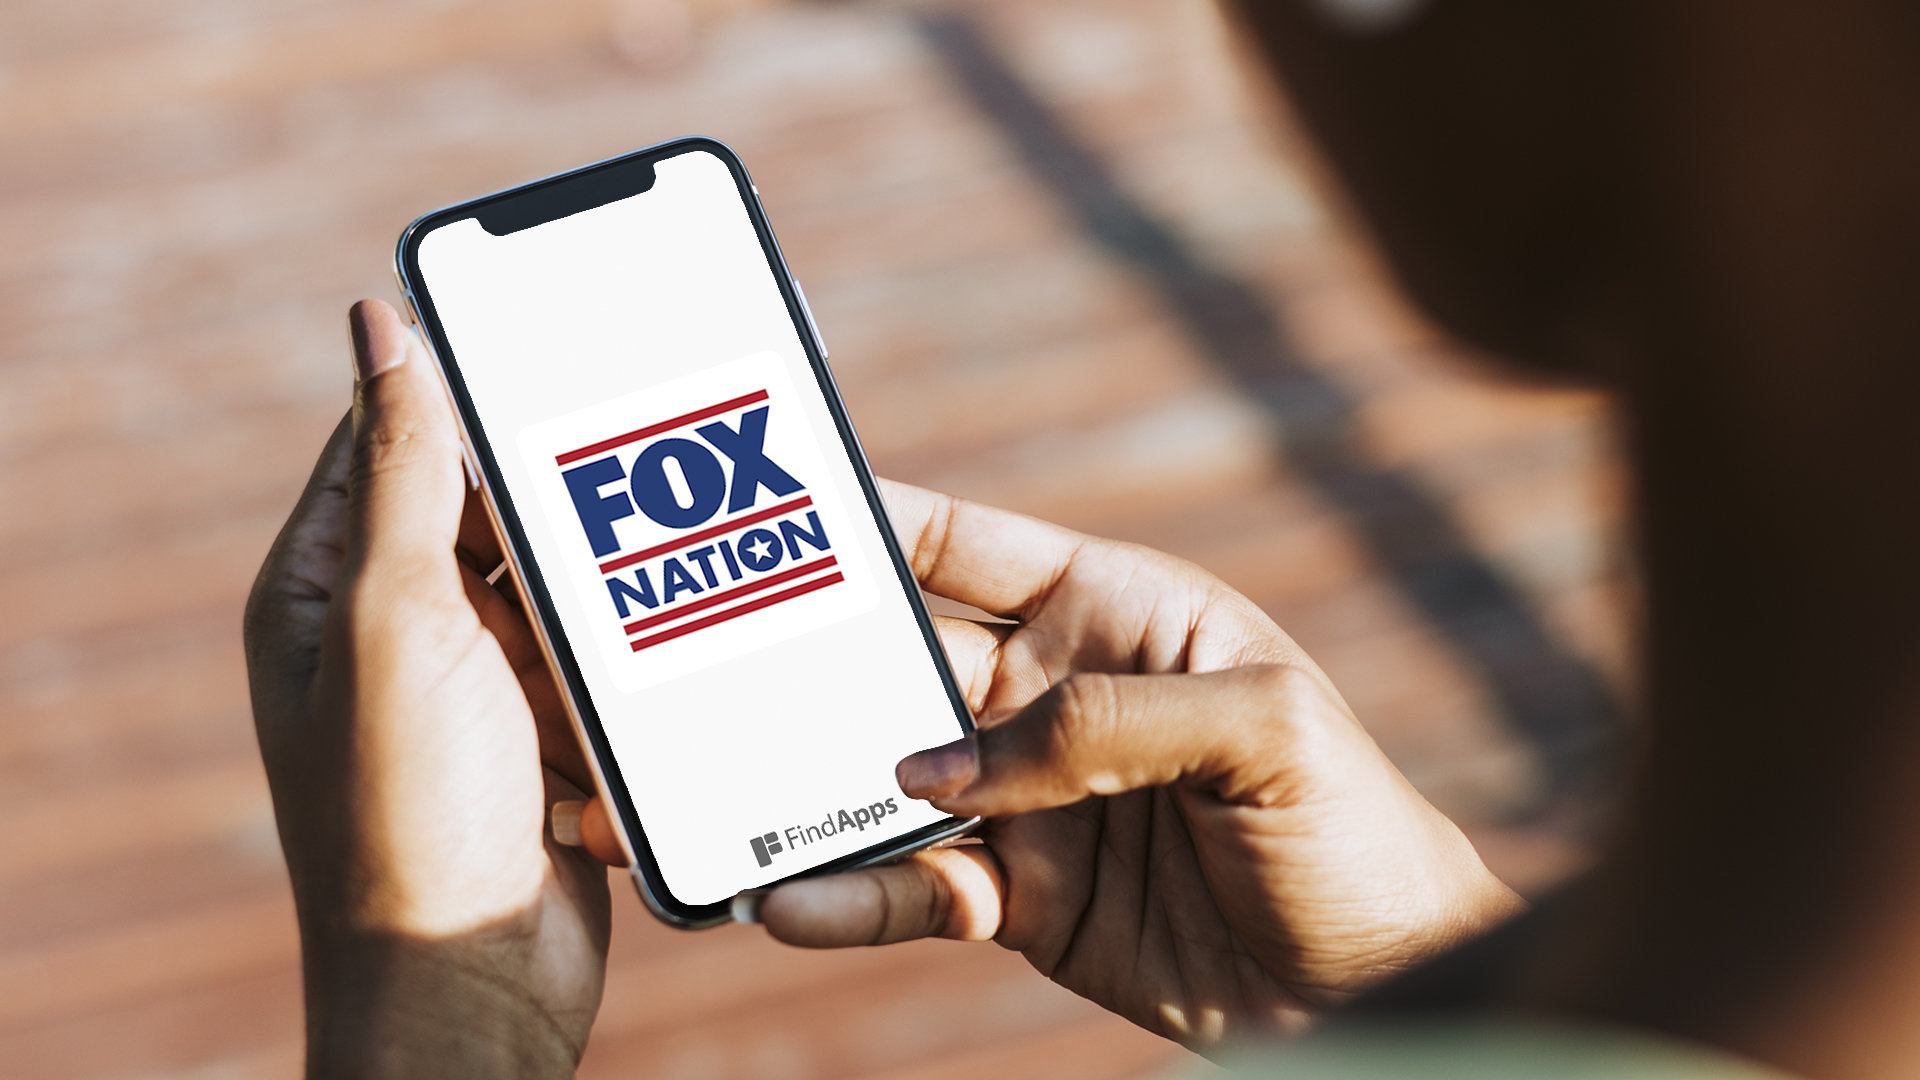 "FOX Nation" app, review.